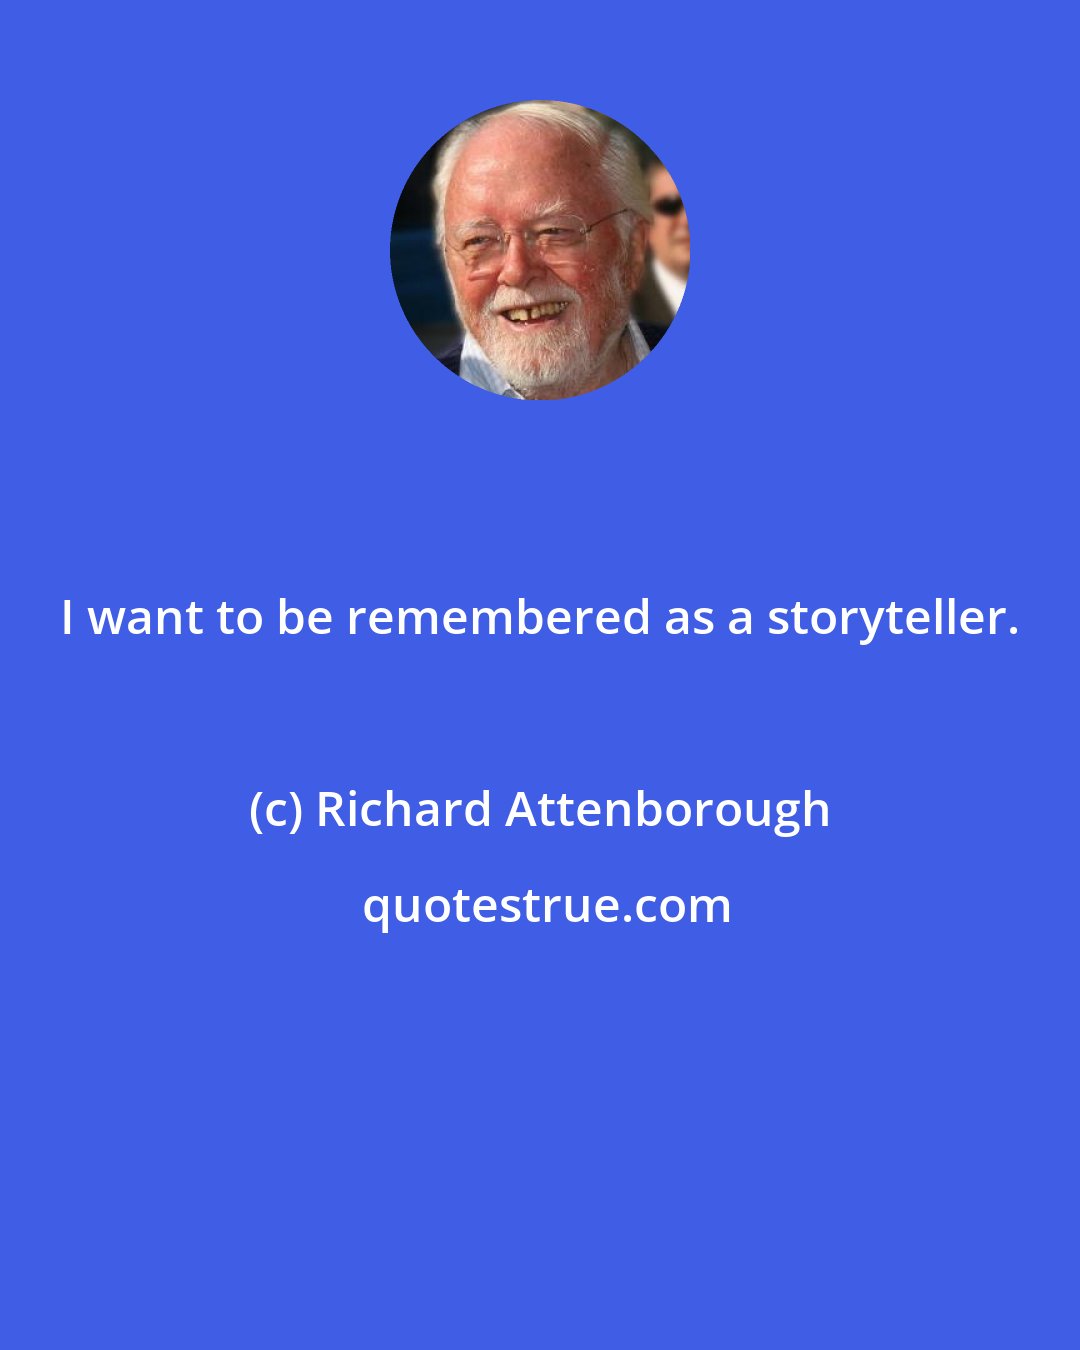 Richard Attenborough: I want to be remembered as a storyteller.